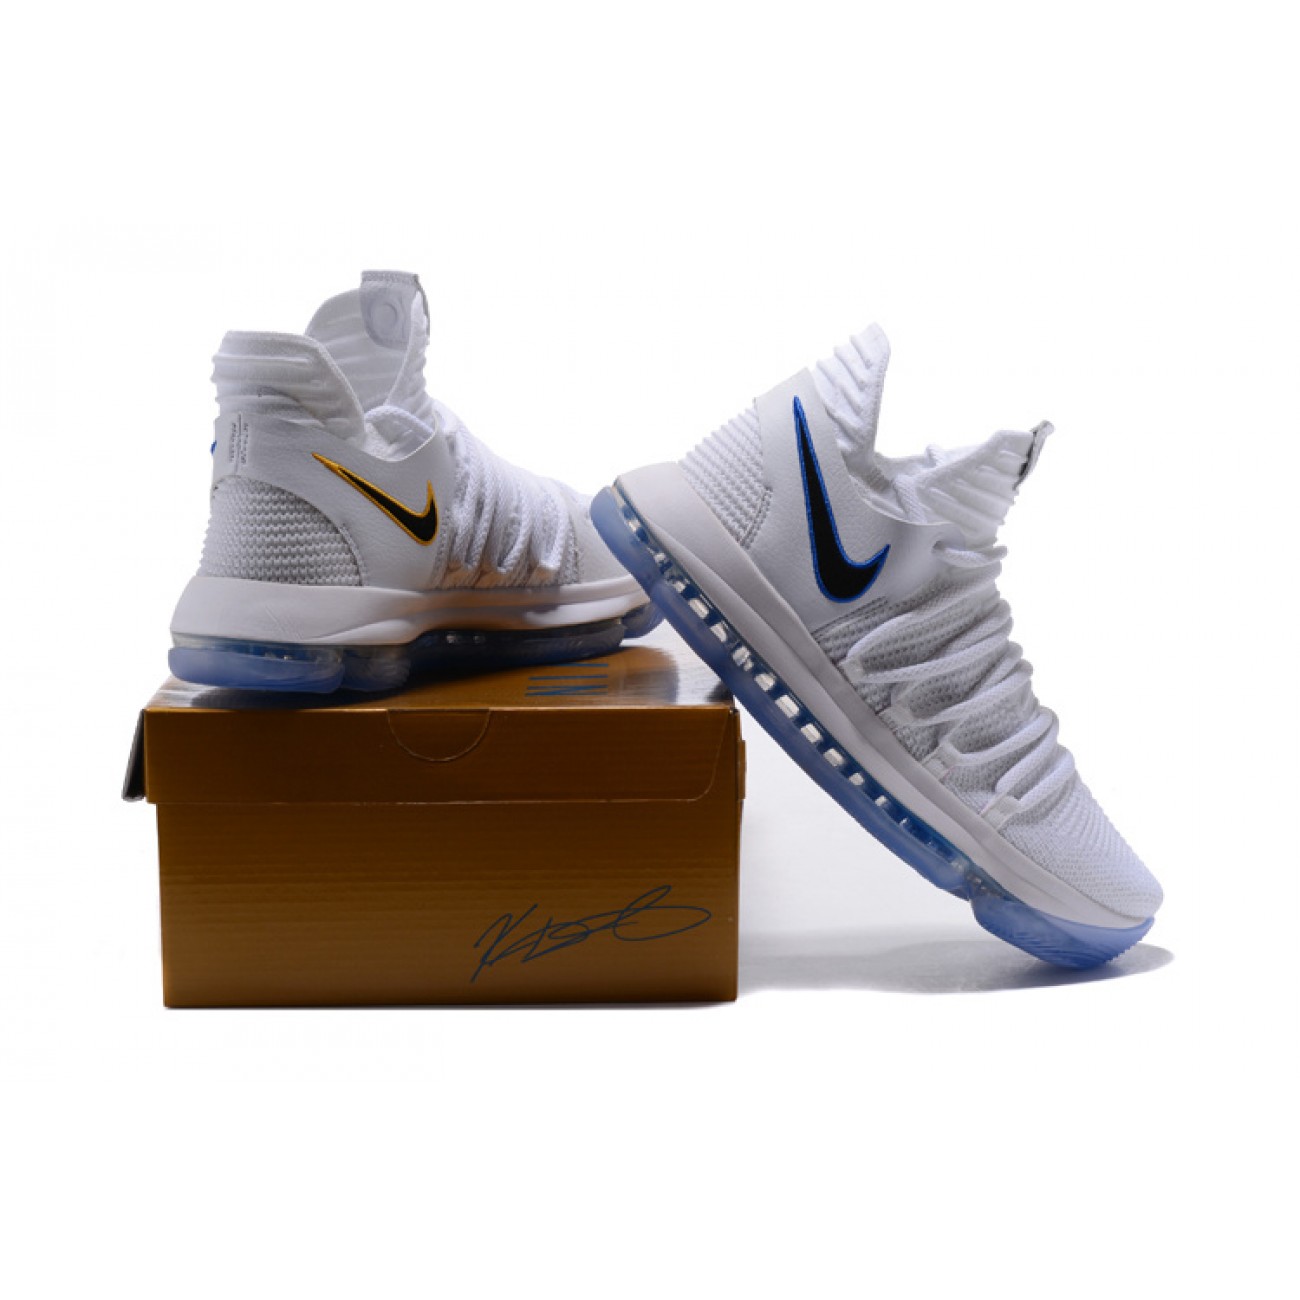 Kevin Durant KD10 "Opening Night" White